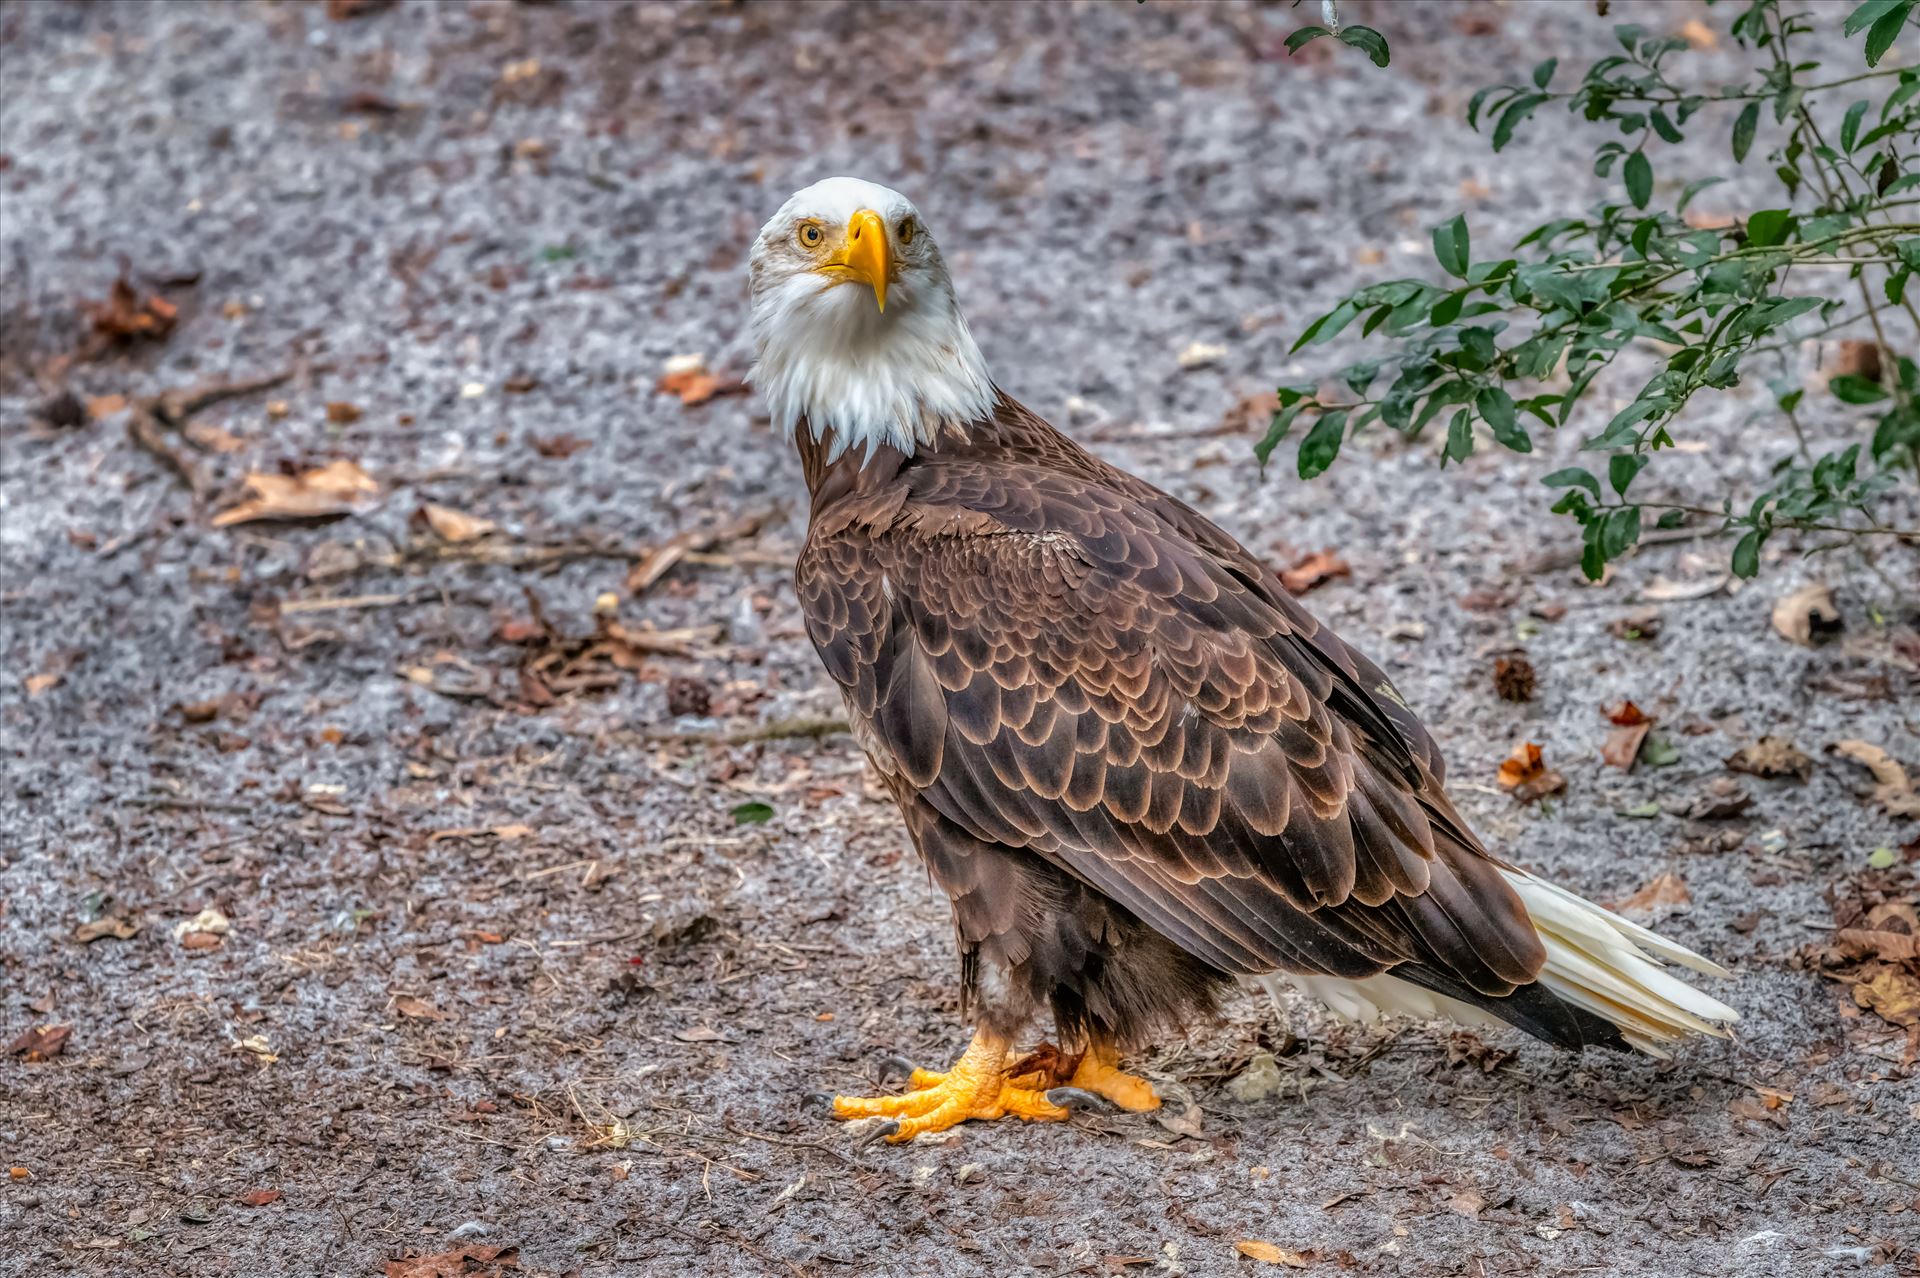 Bald Eagle - Bald Eagle standing on the ground and looking back by Terry Kelly Photography